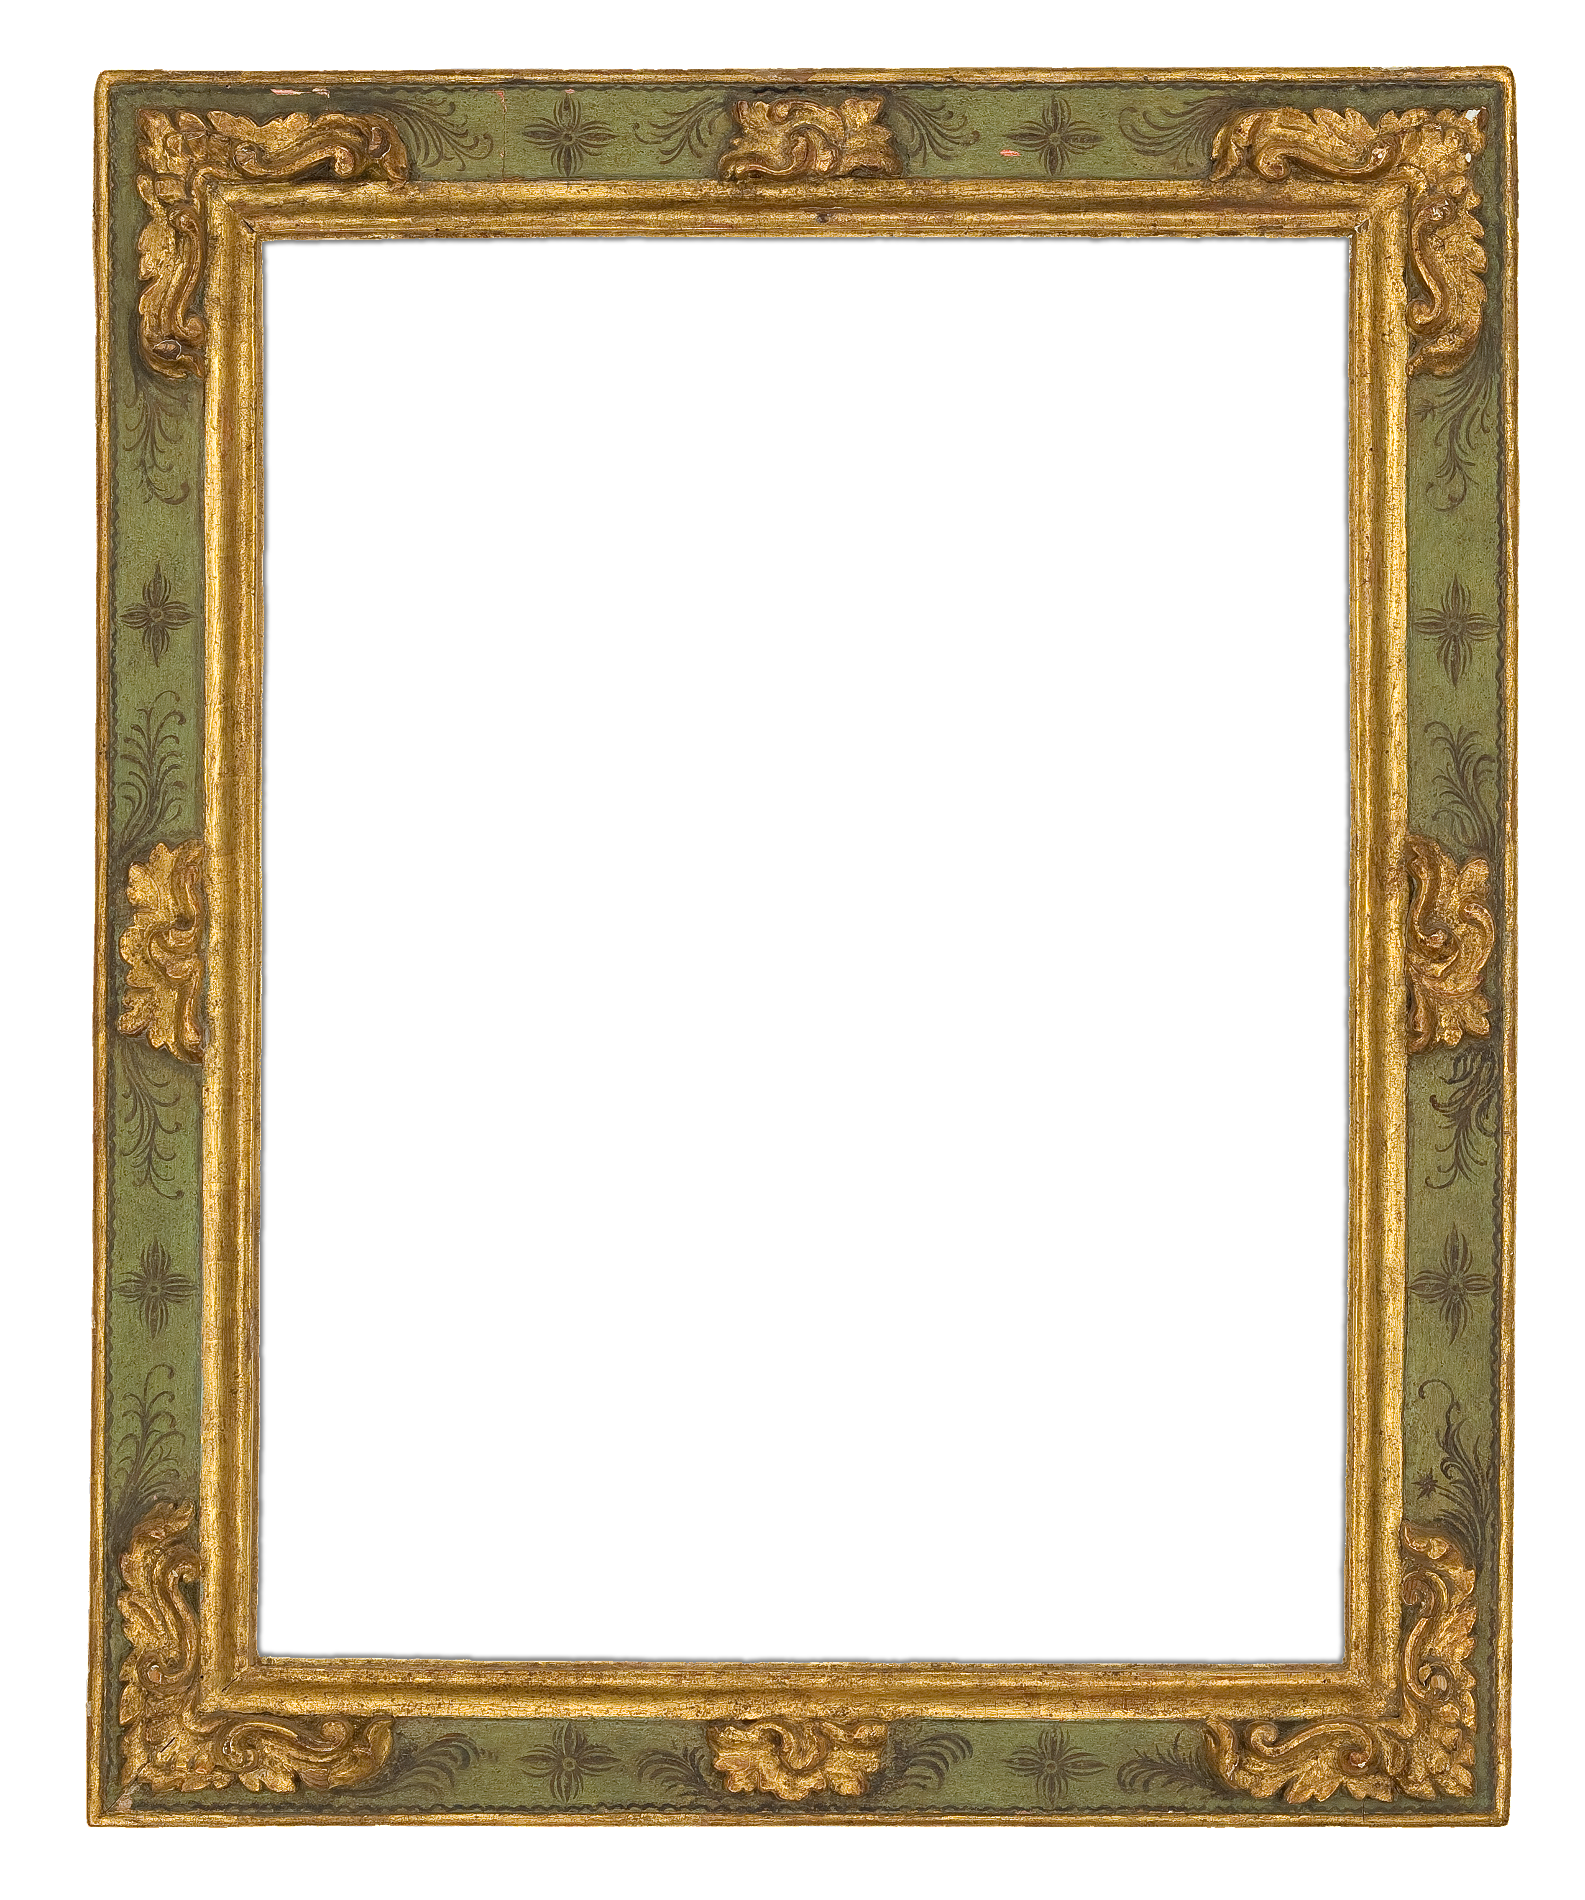 painted frame